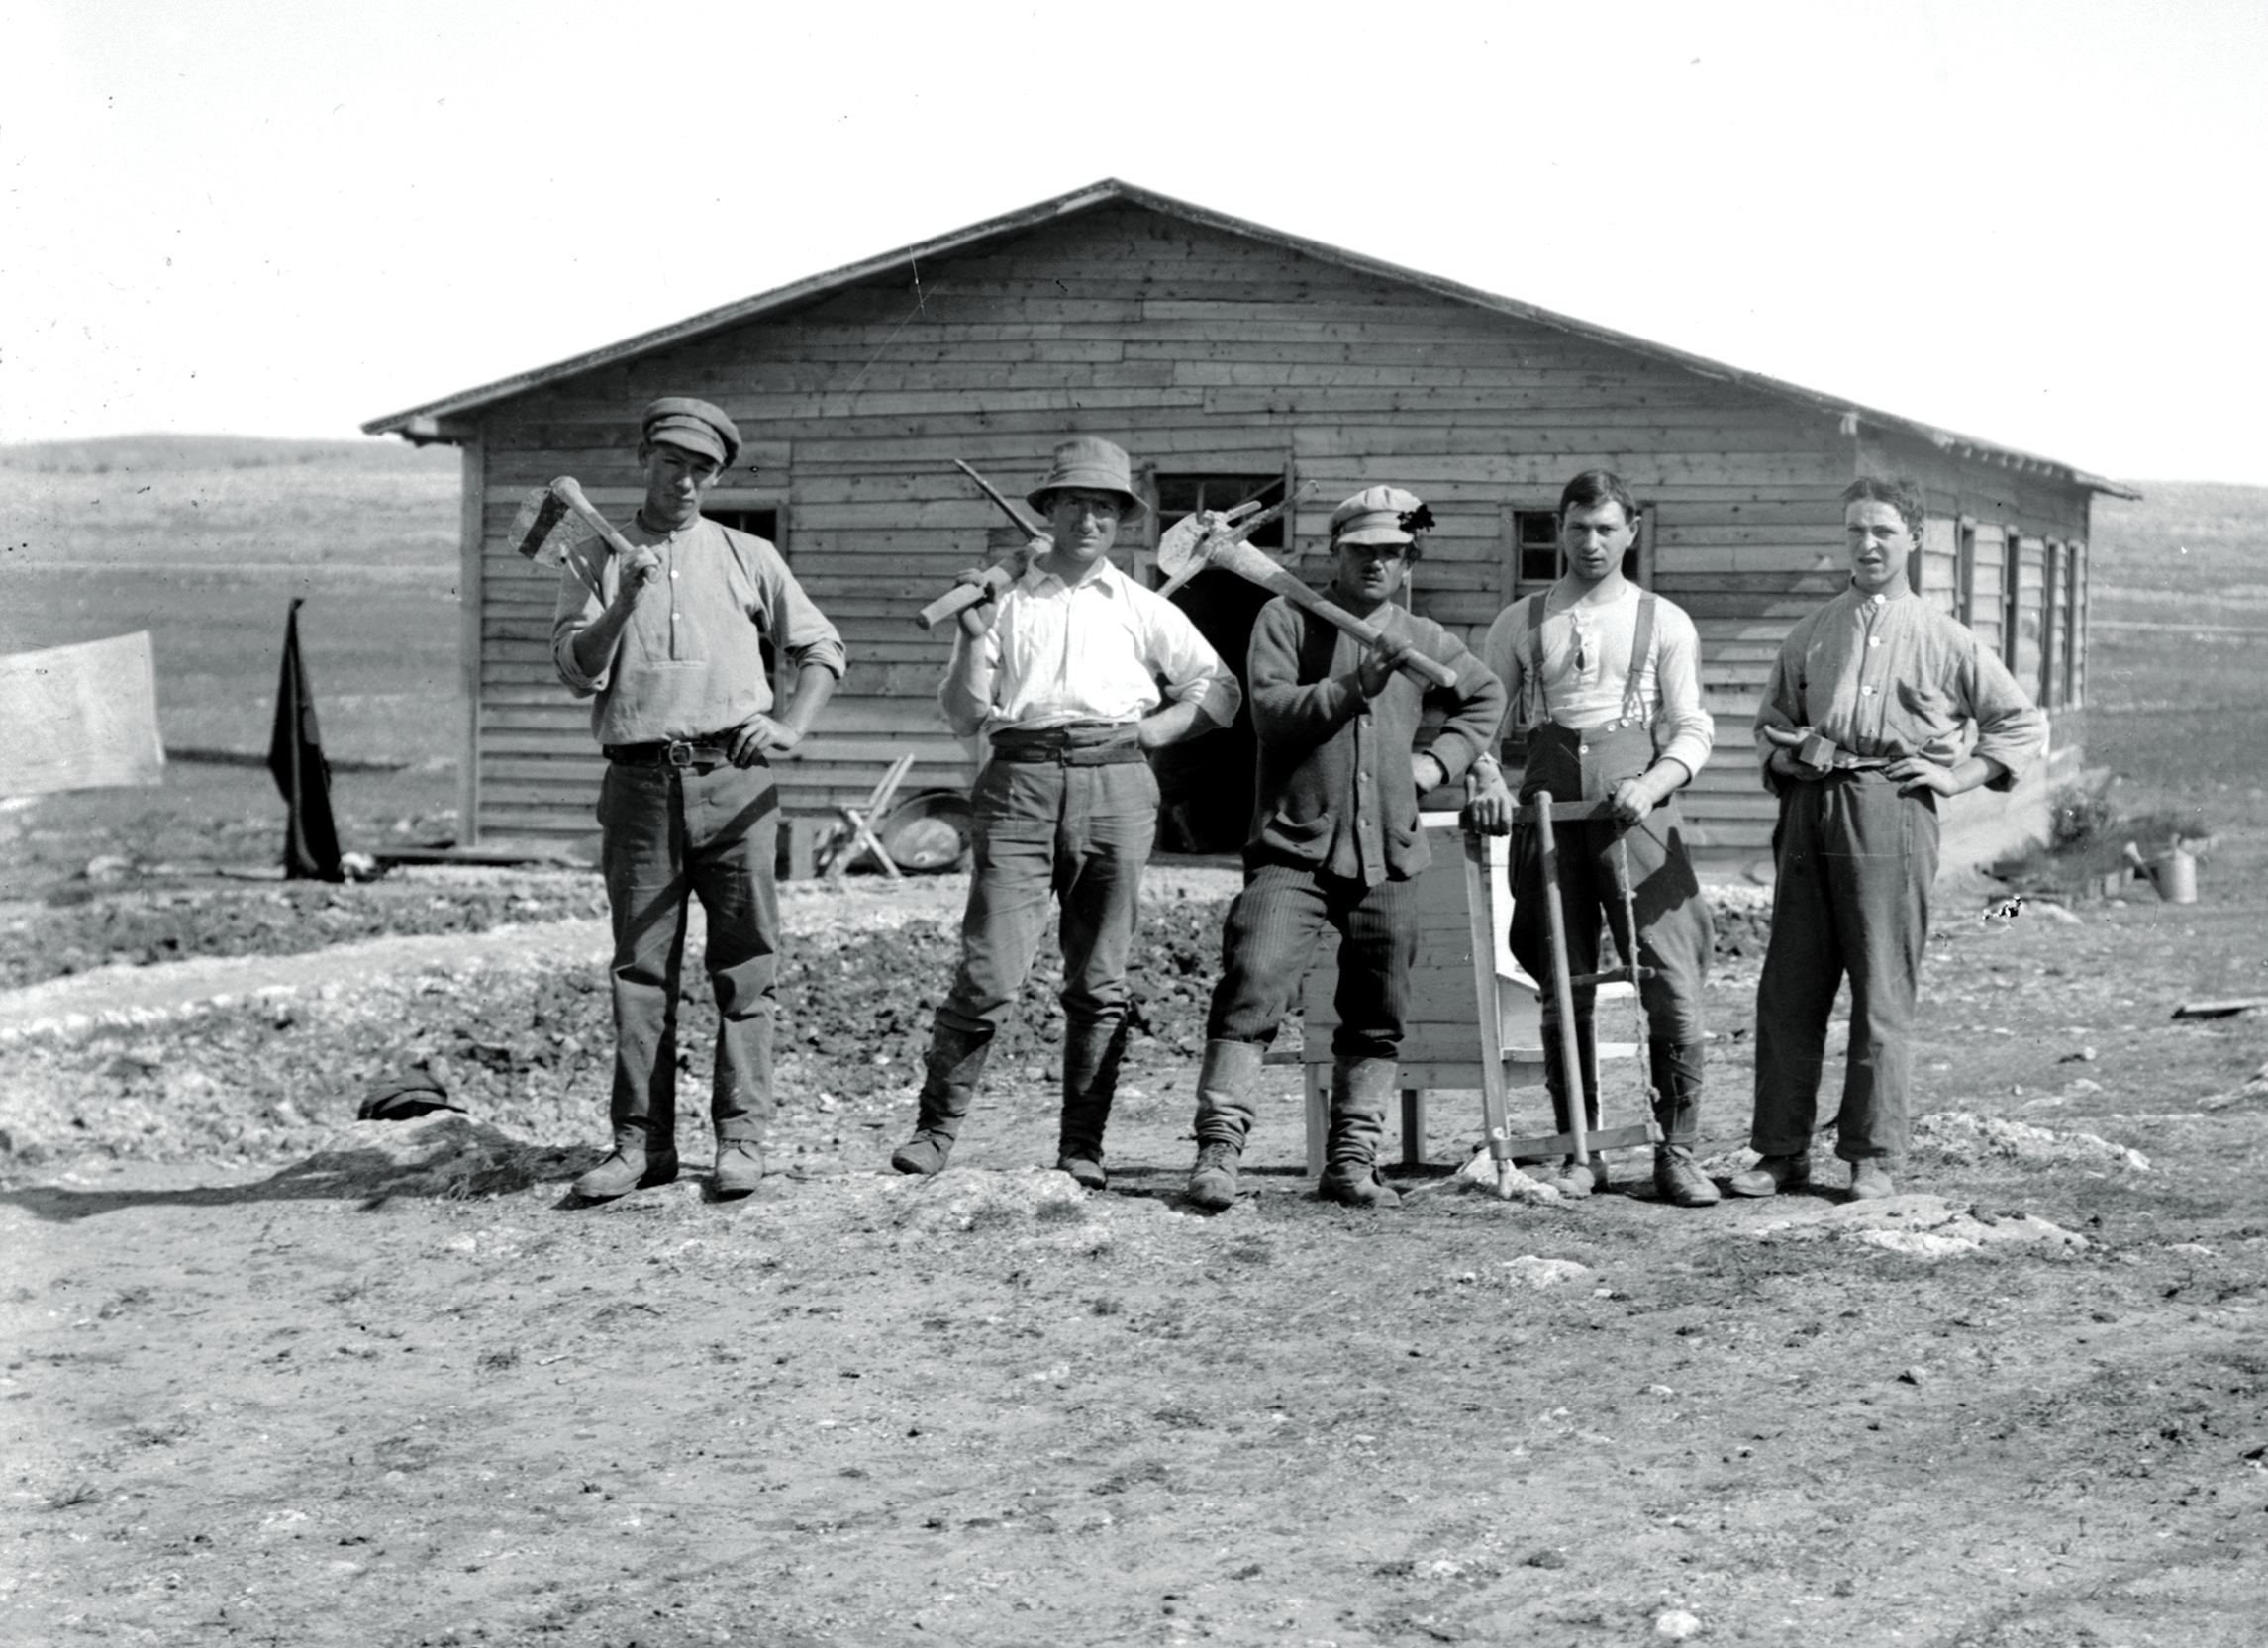 Commencing a Jewish settlement. Types of settlers. Approximately 1920 to 1930. matpc.02355.jpg